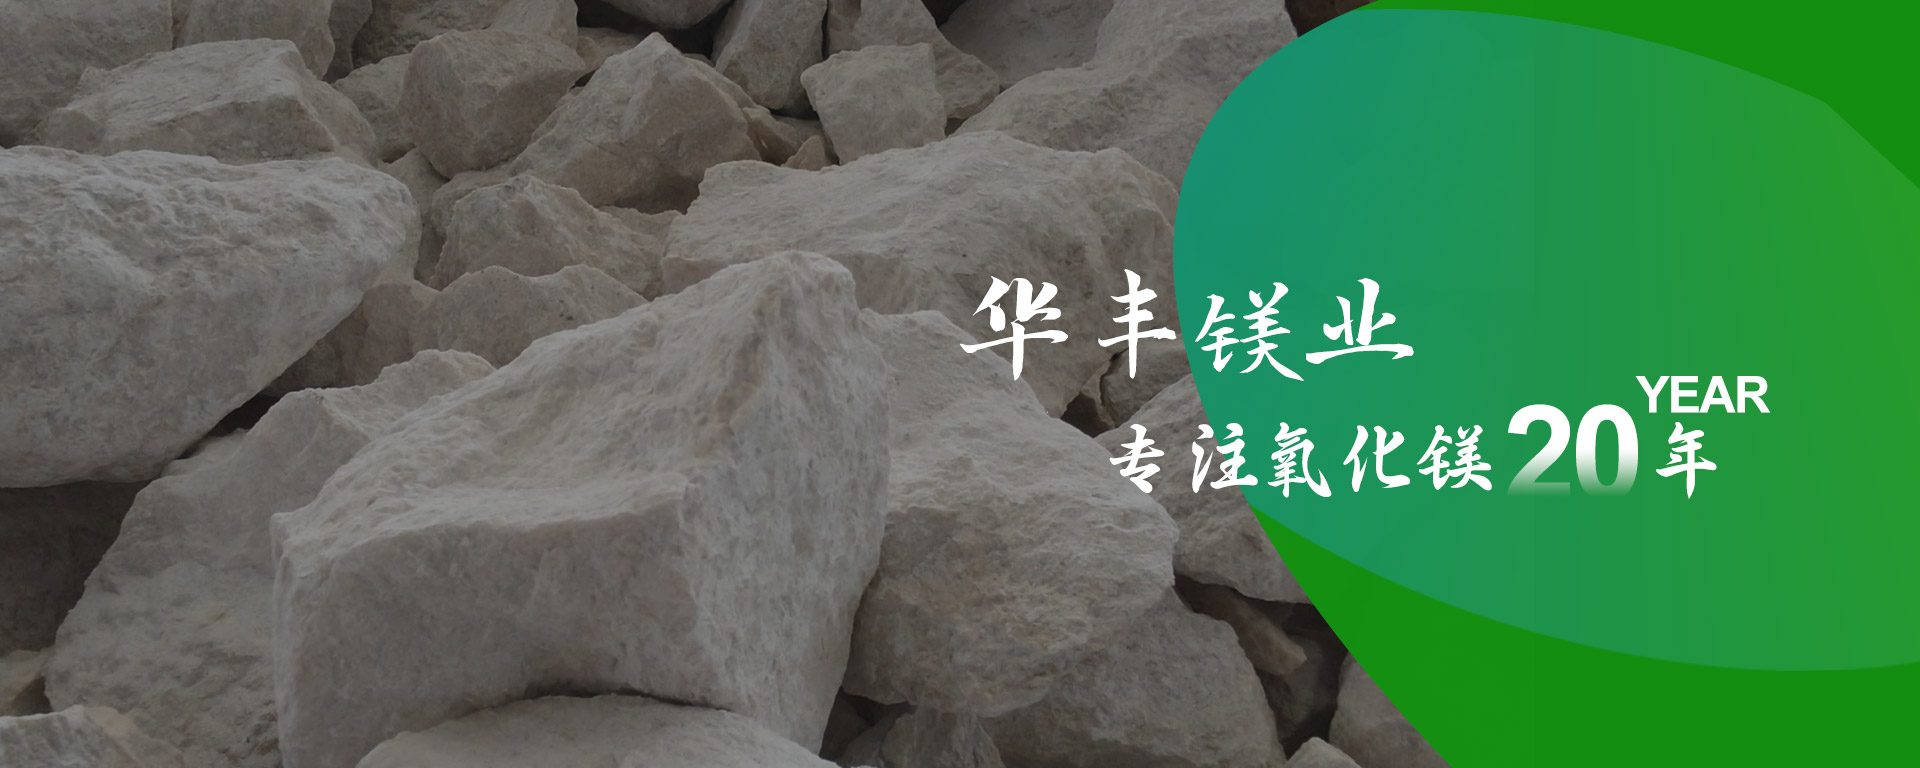 Huafeng Magnesium Industry